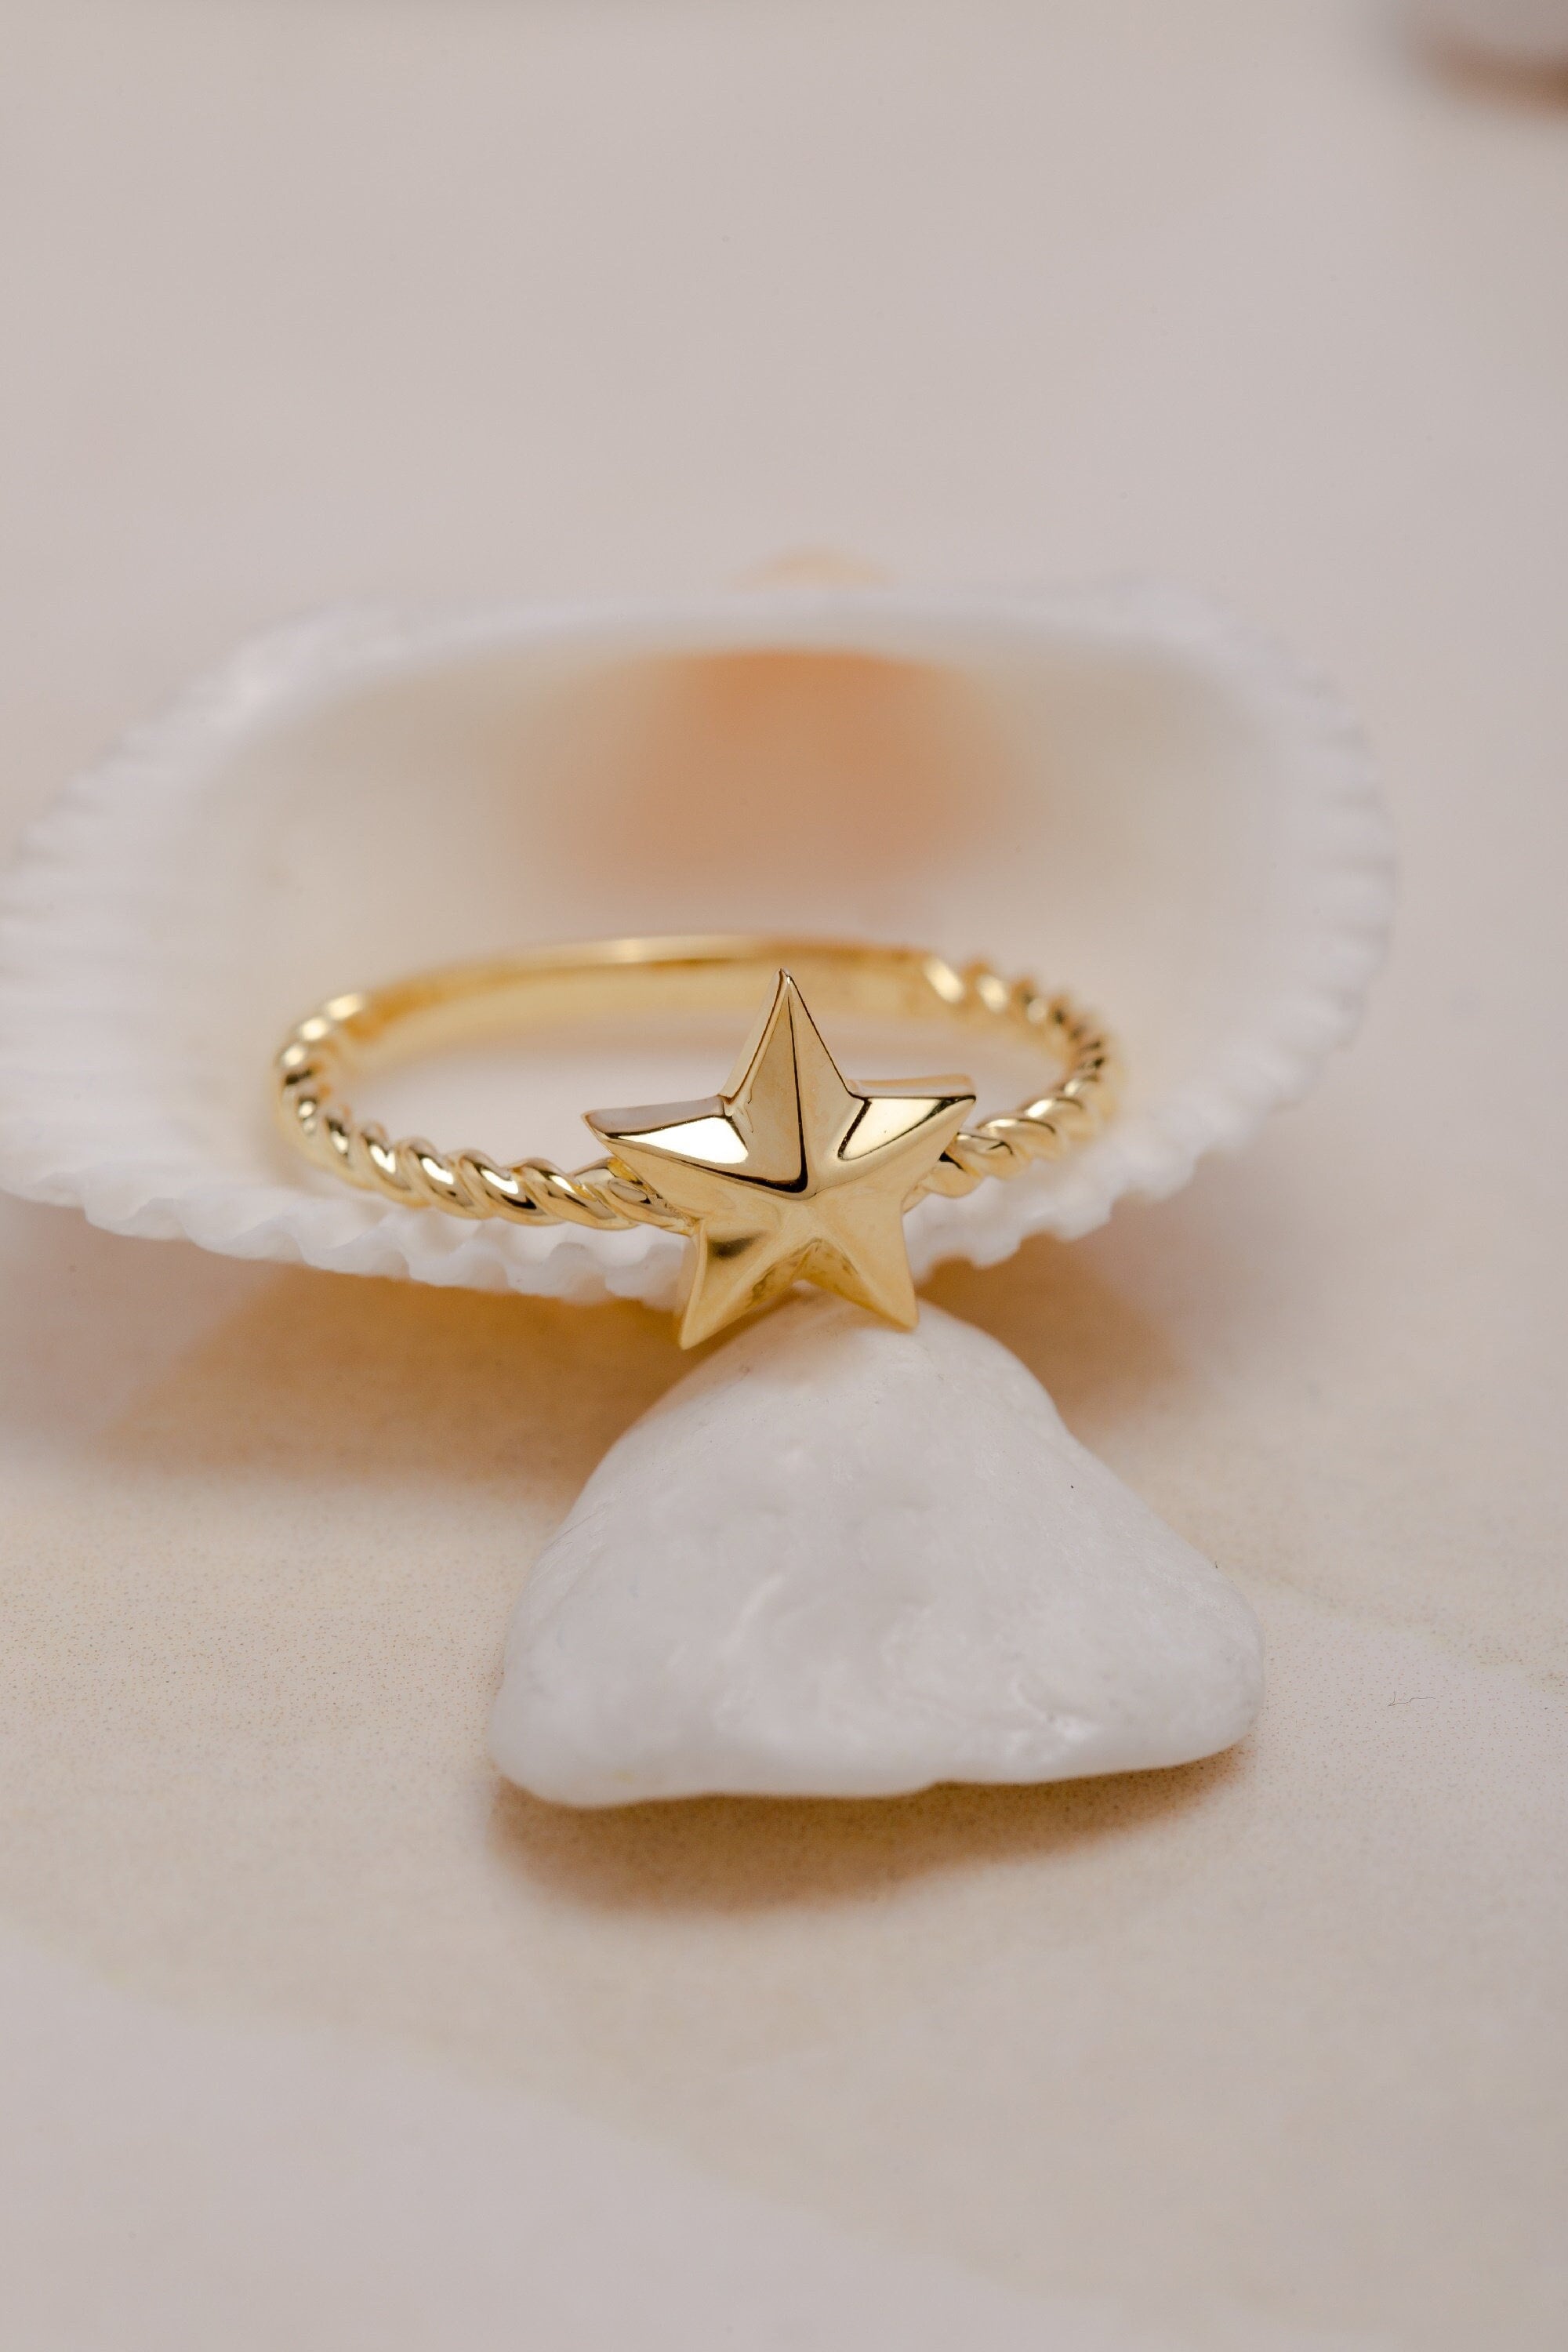 925 Sterling Silver Star Ring, Designer Star Shaped Ring, Handcrafted Ring, Dainty Star Ring, Gift For Mother Day, Mother Day Jewelry